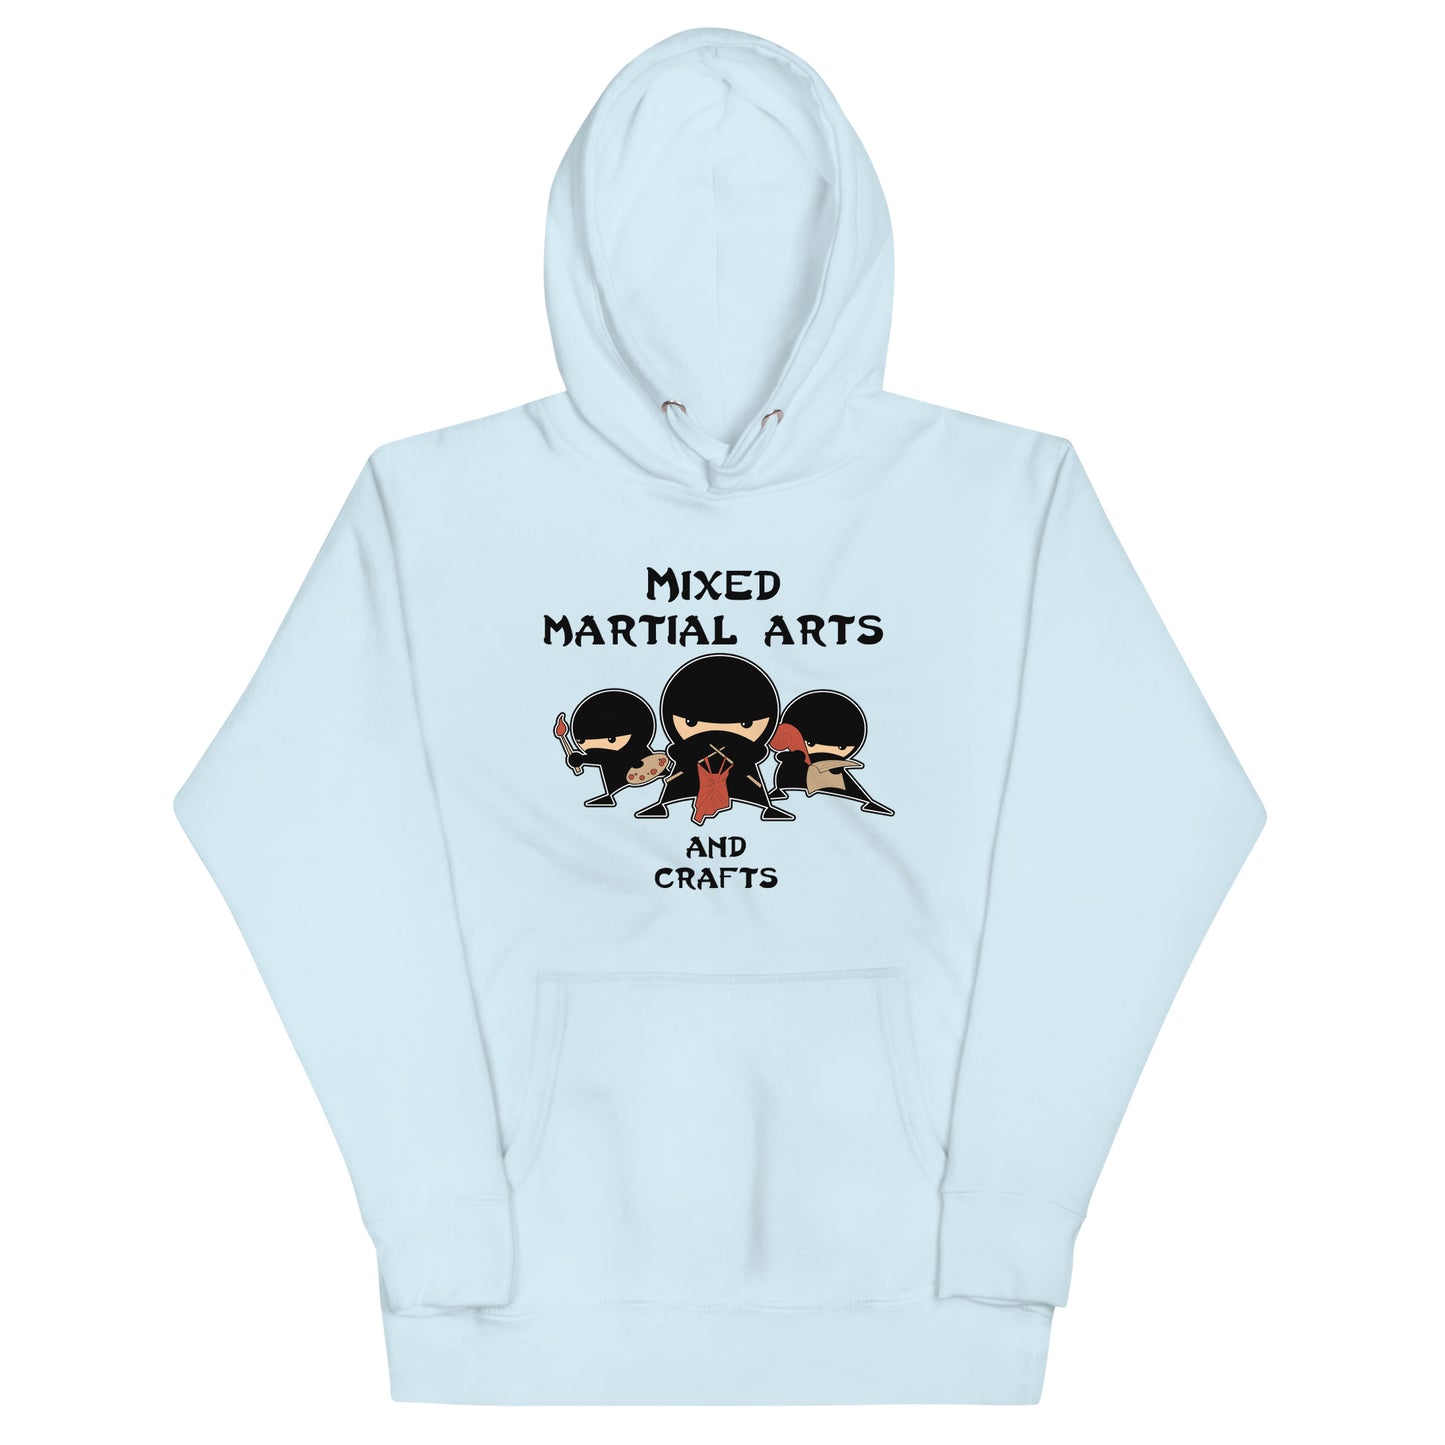 Mixed Martial Arts and Crafts Unisex Hoodie